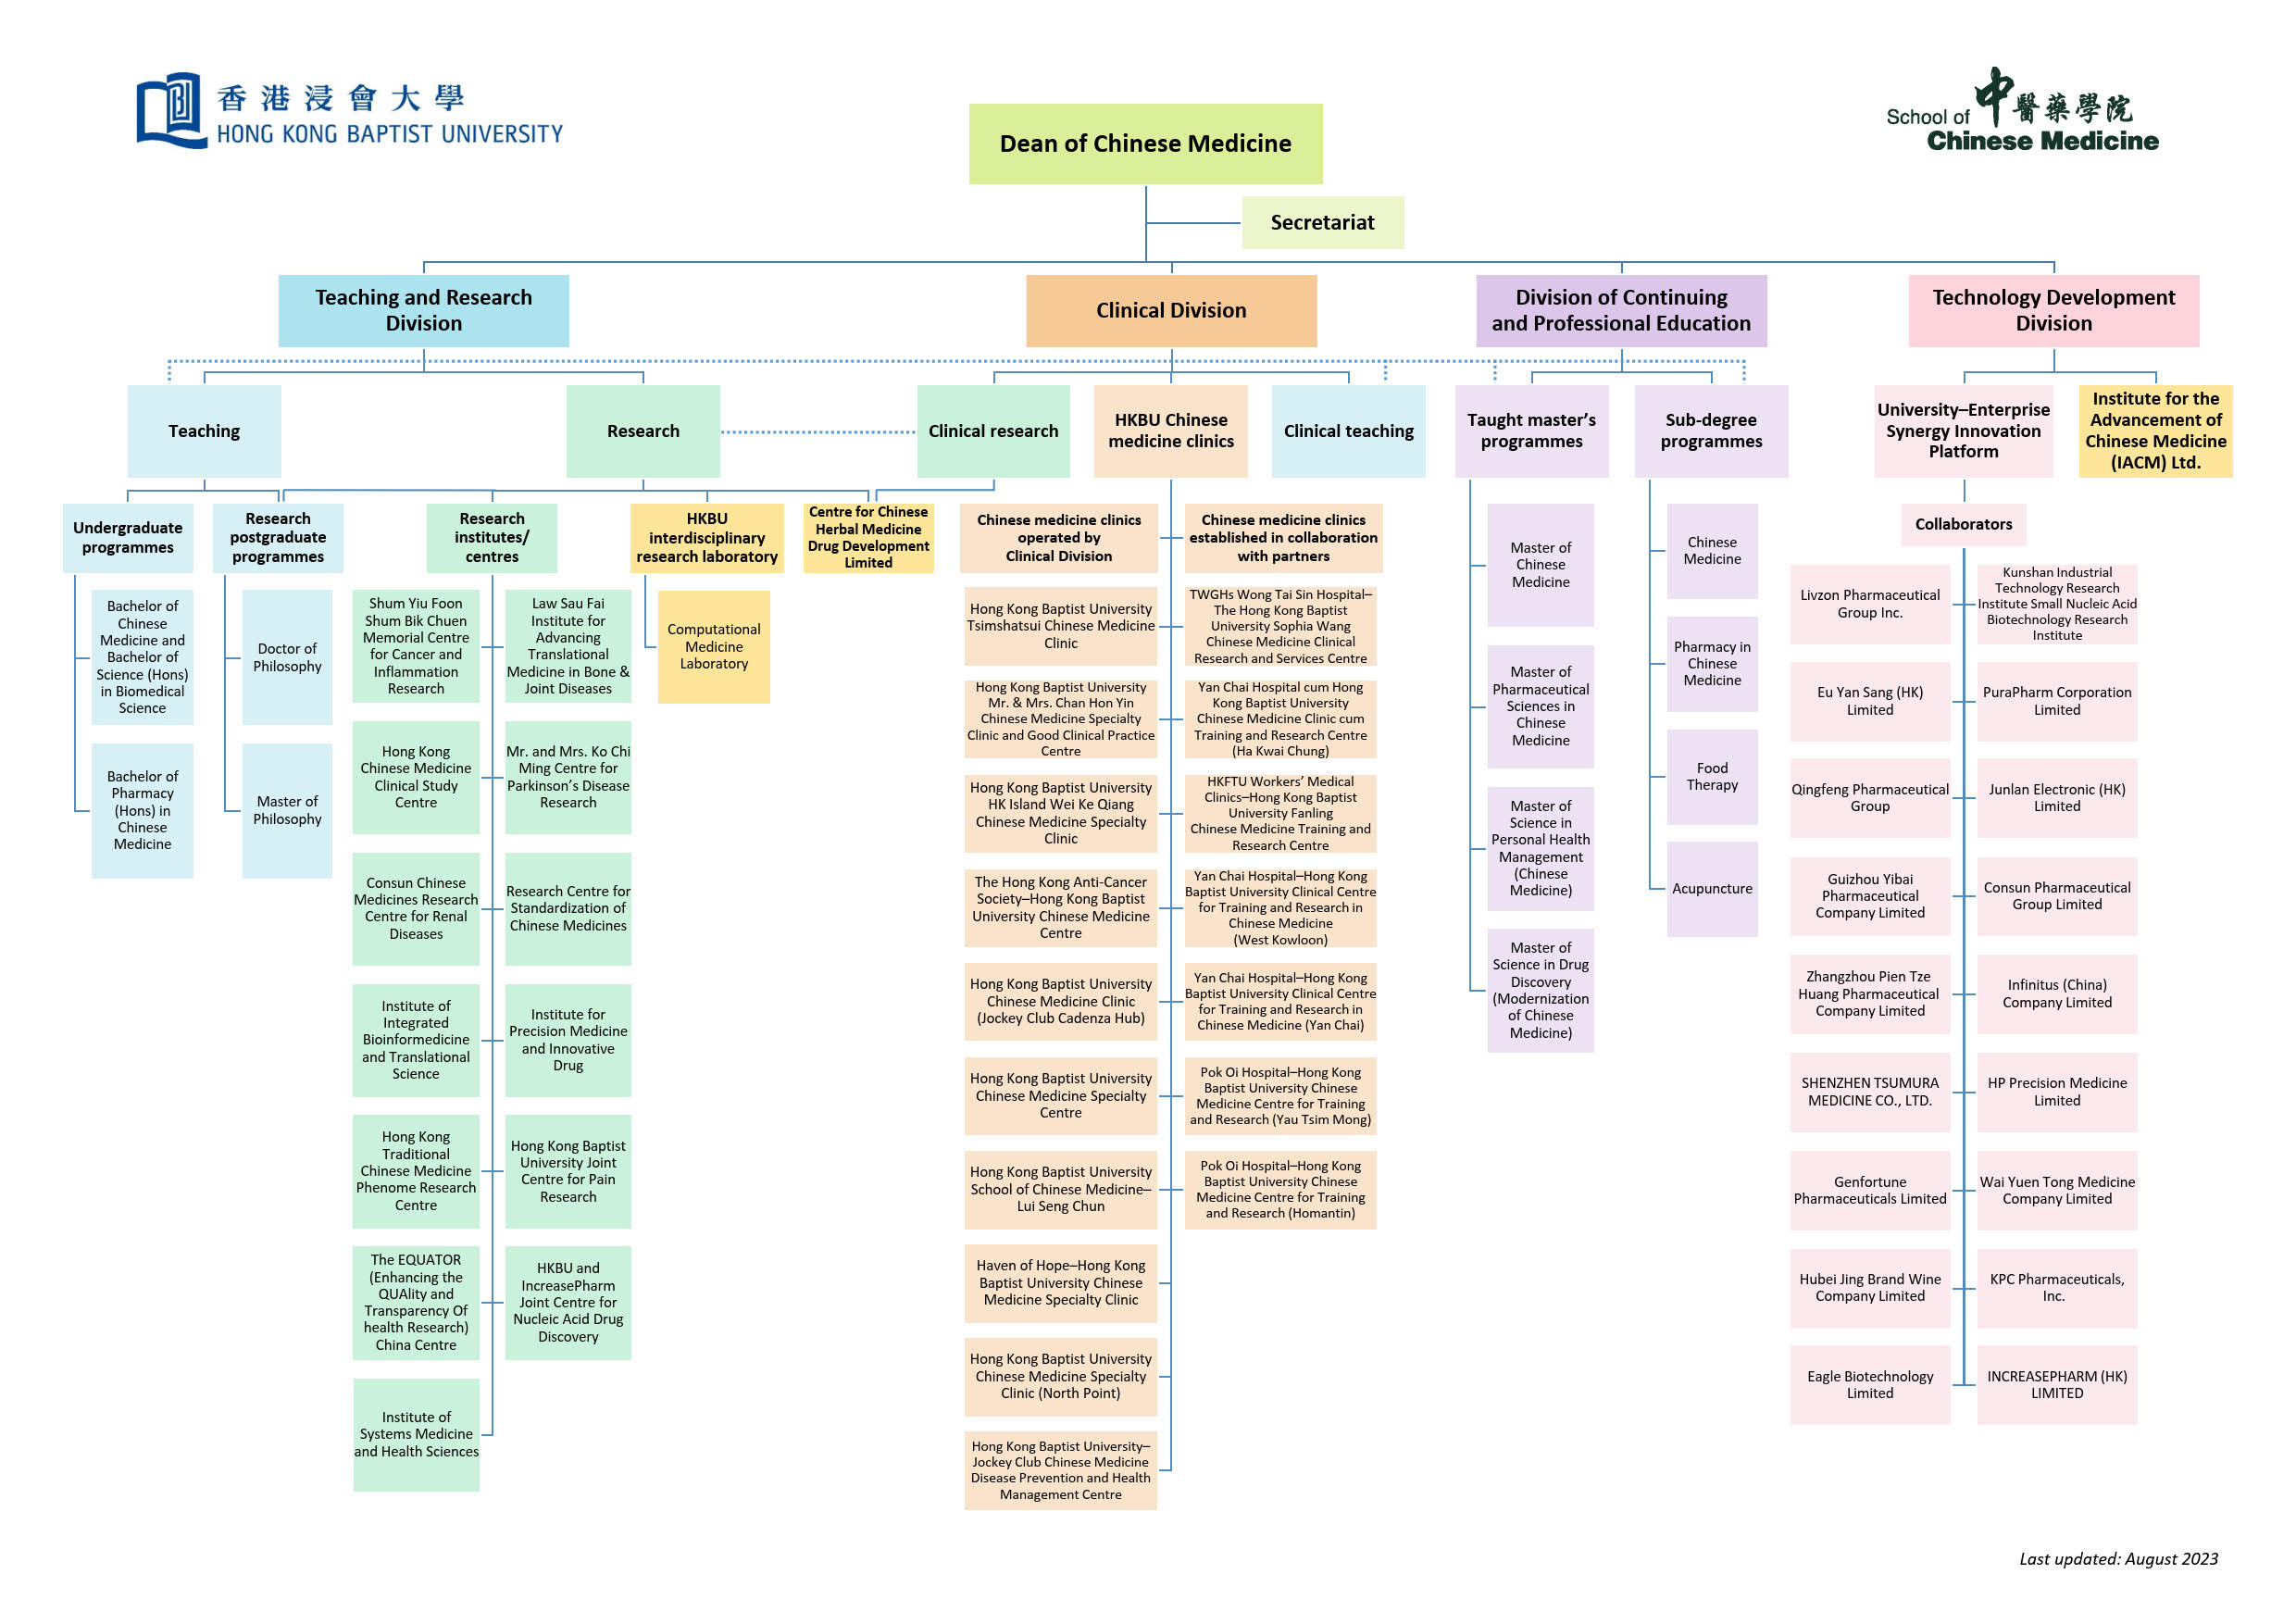 Organisation Chart of the School of Chinese Medicine